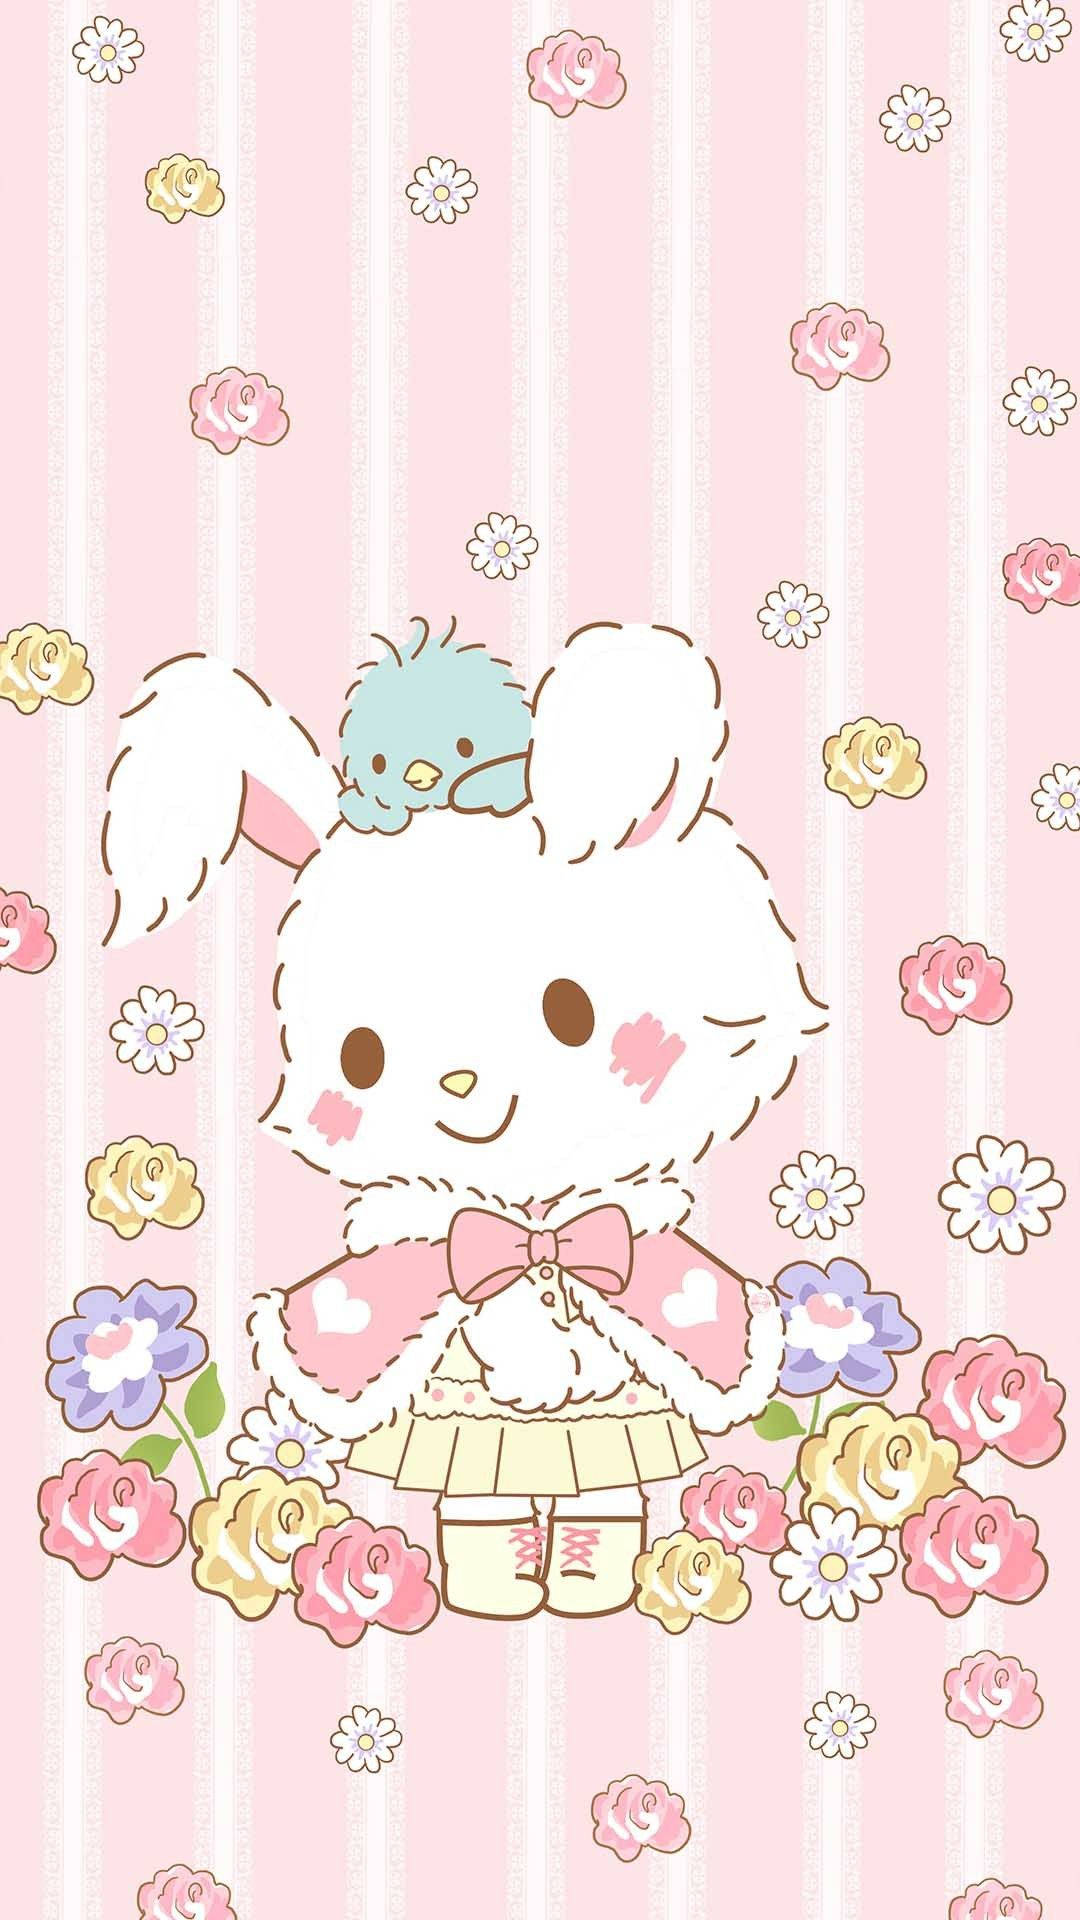 Make a wish with Wish Me Mell and Sanrio! Wallpaper